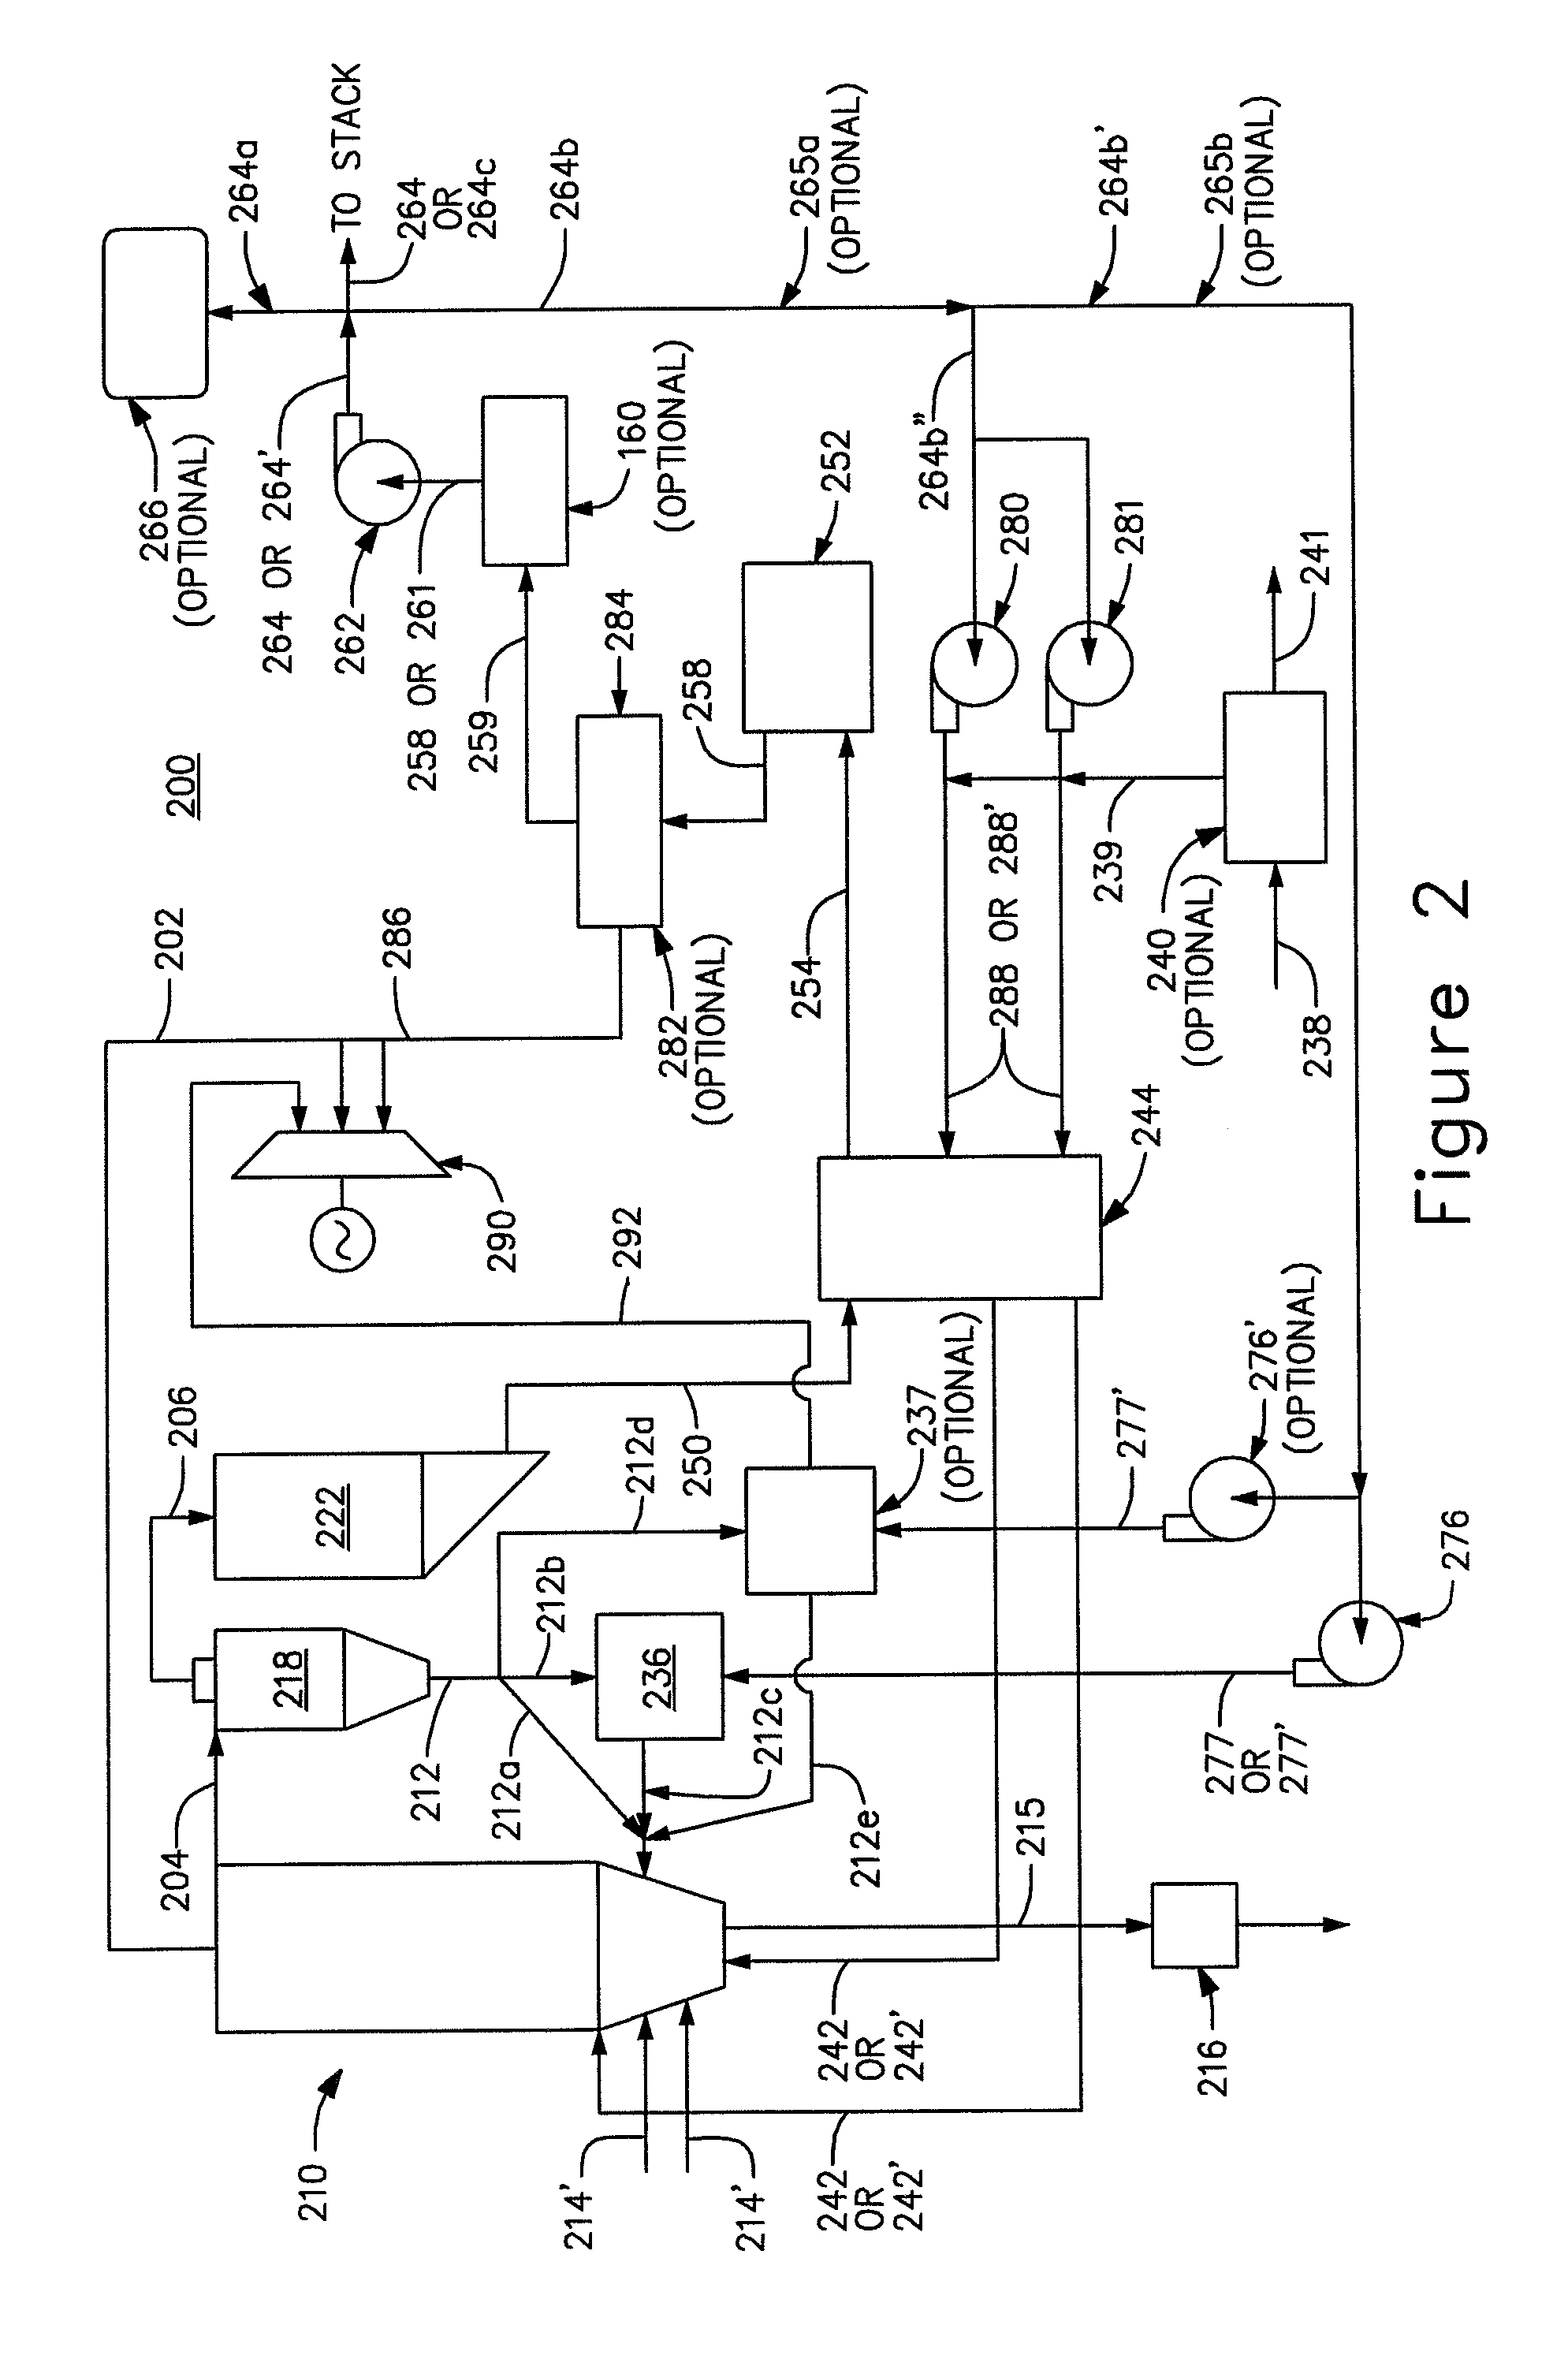 Air-fired co2 capture ready circulating fluidized bed steam generators